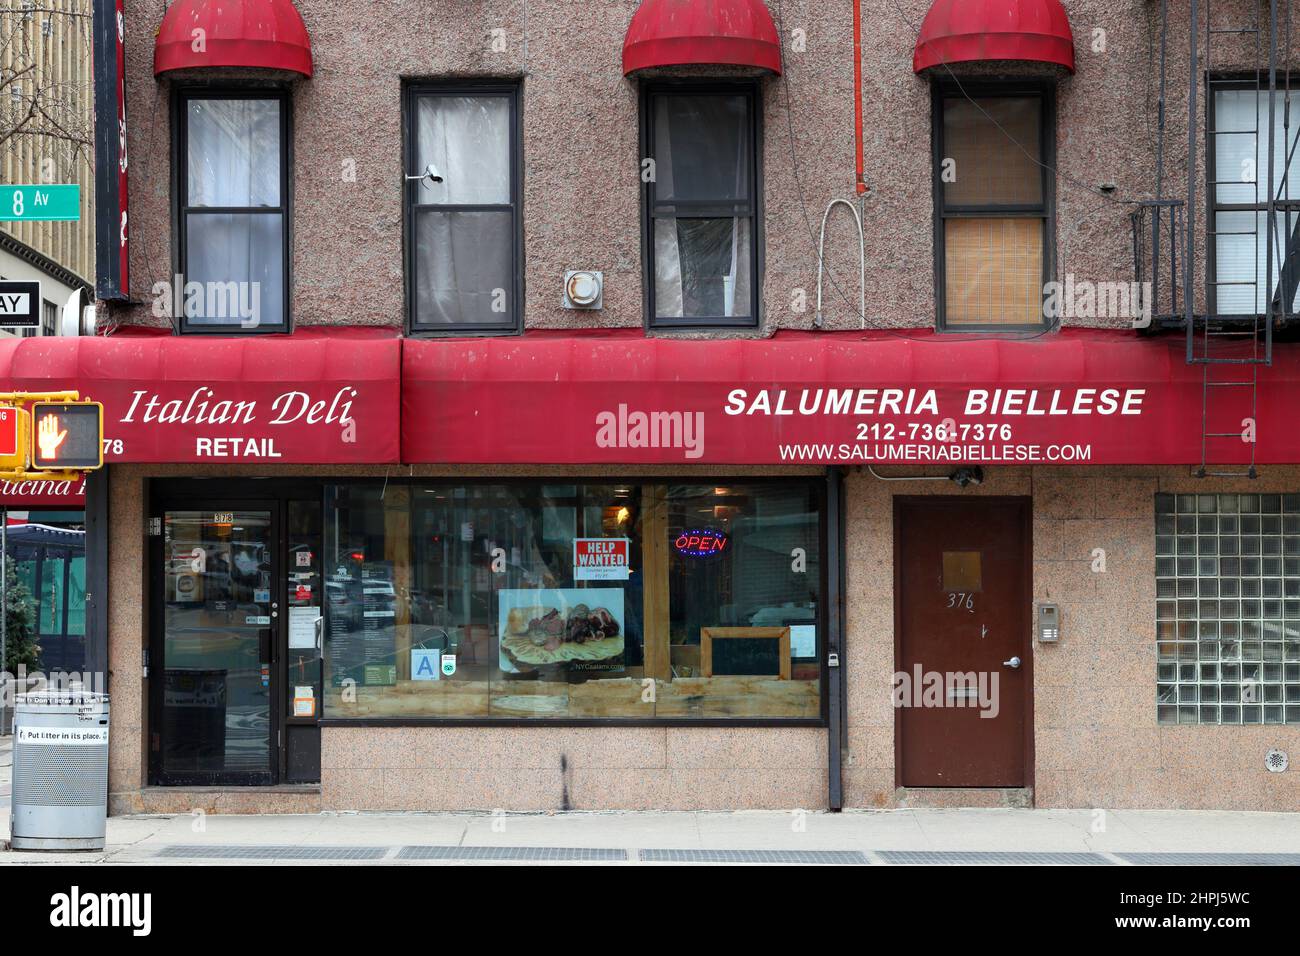 Salumeria Biellese, 378 8th Ave, New York, NYC storefront photo of an Italian sausage manufacturer and deli in Manhattan's Chelsea neighborhood Stock Photo